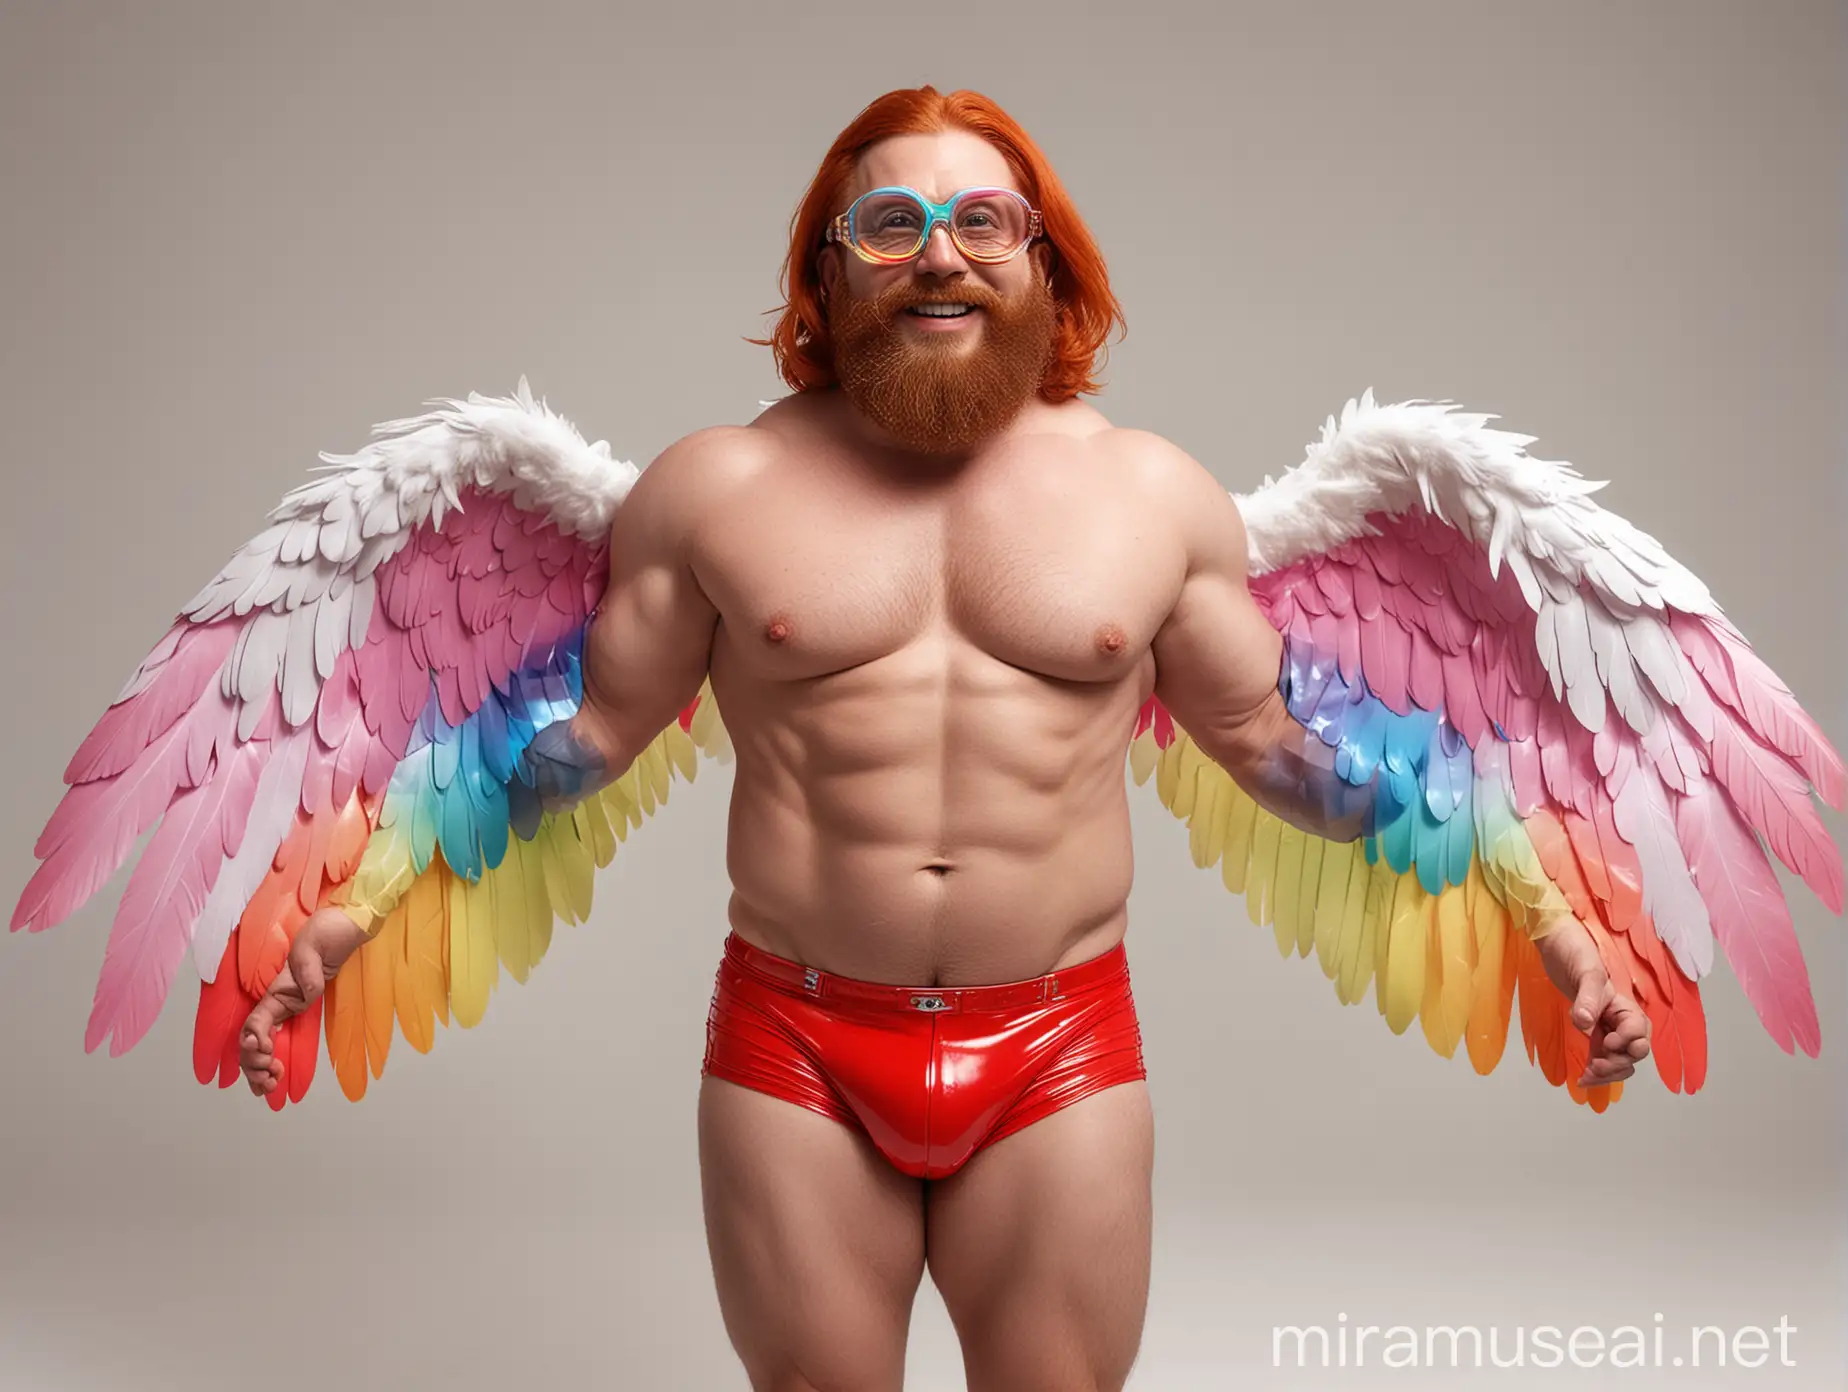 Topless 40s Red Head Bodybuilder Flexing with Rainbow Eagle Wings Jacket